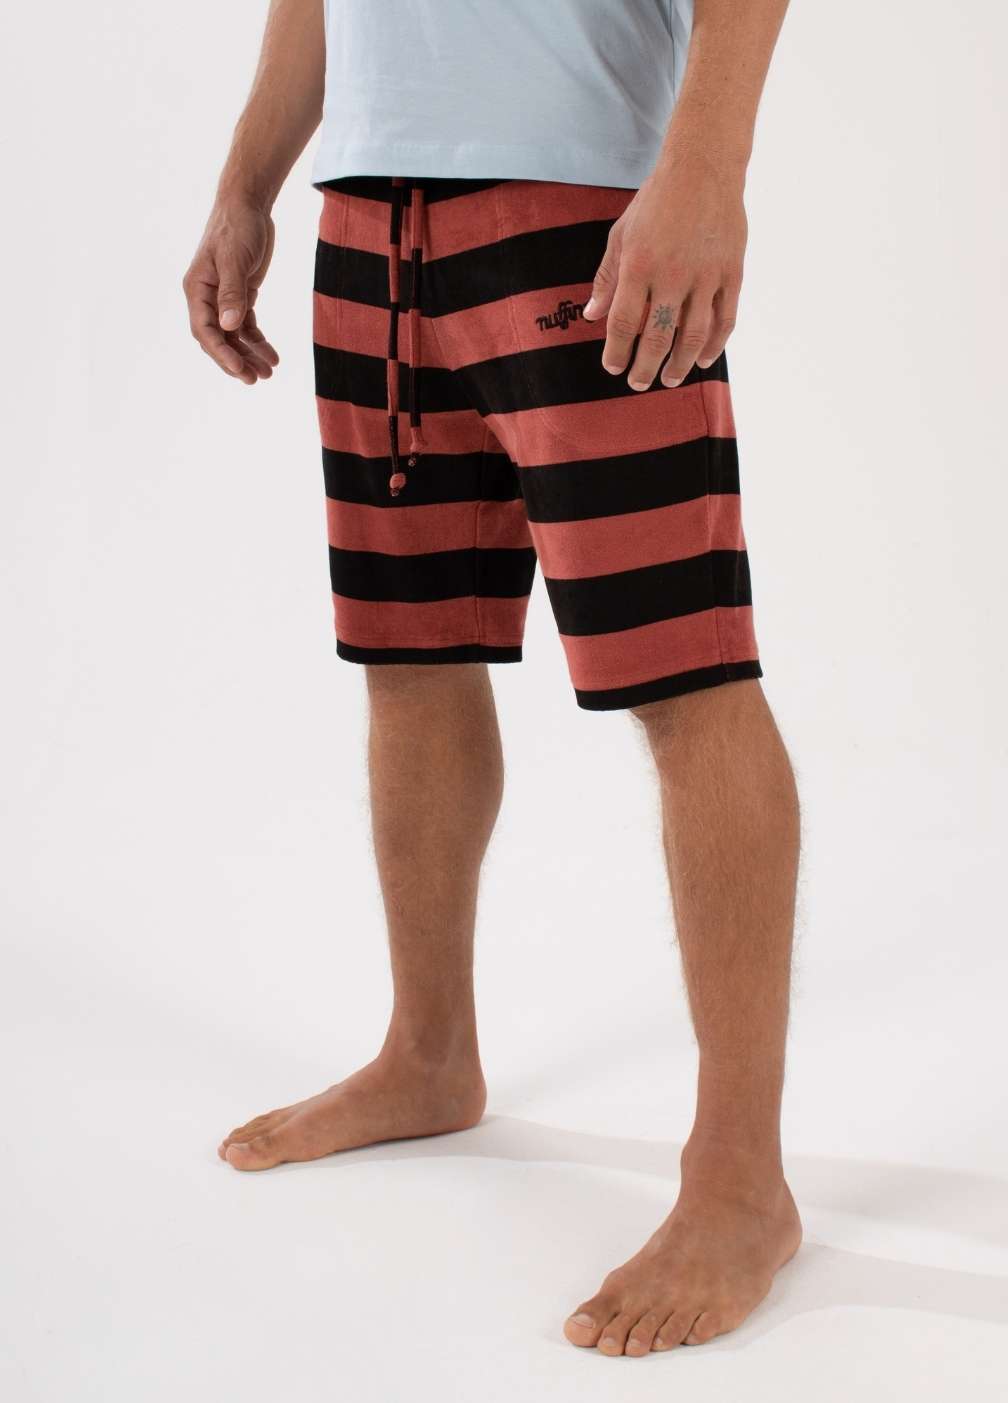 nuffinz striped shorts - TANDOORI SPICE TOWEL SHORTS ST - 100% organic cotton - terry cloth - comfortable shorts for men - closeup side / front